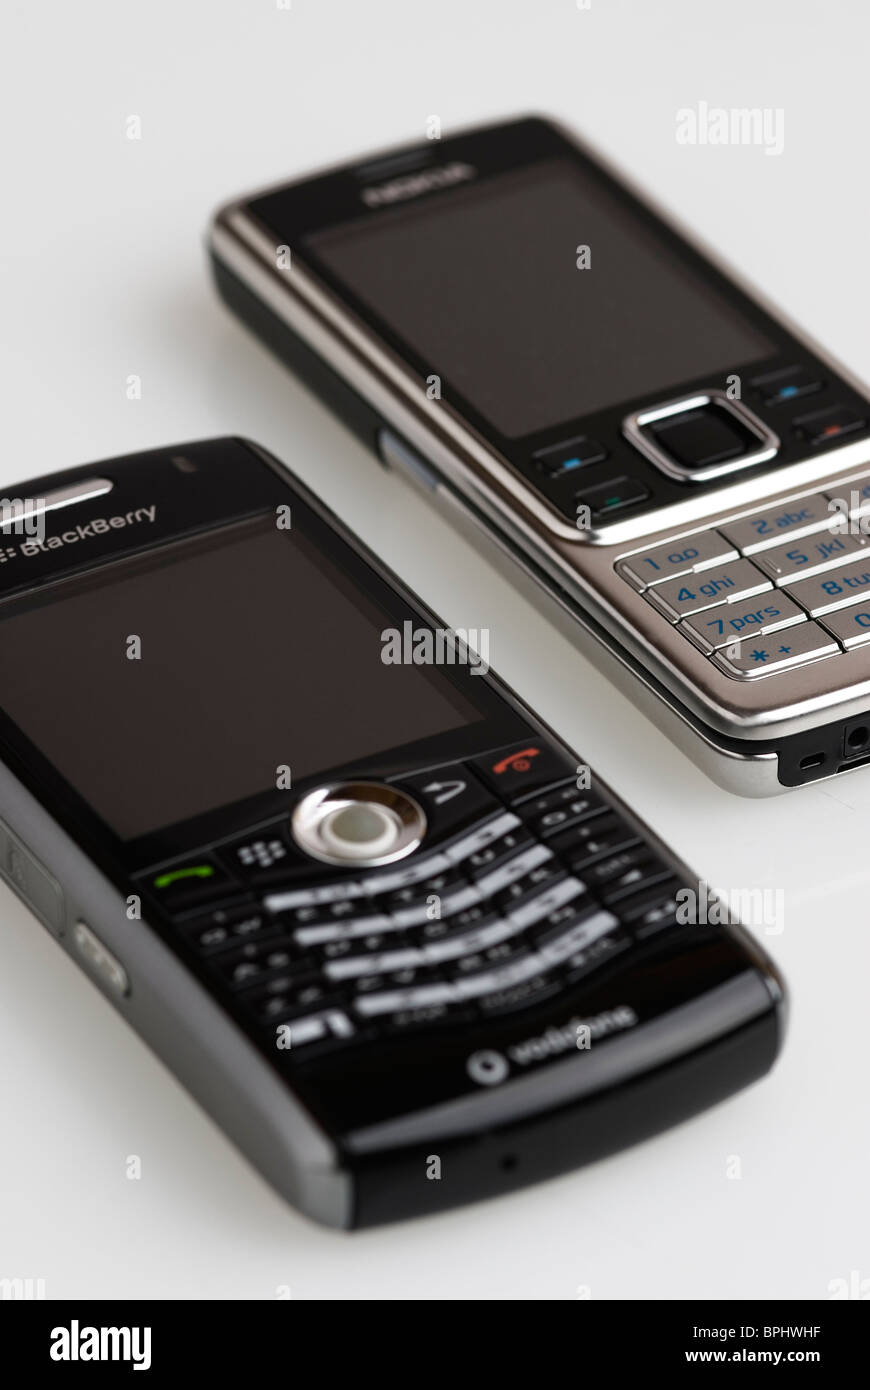 Old Blackberry and Nokia mobile phones. Stock Photo